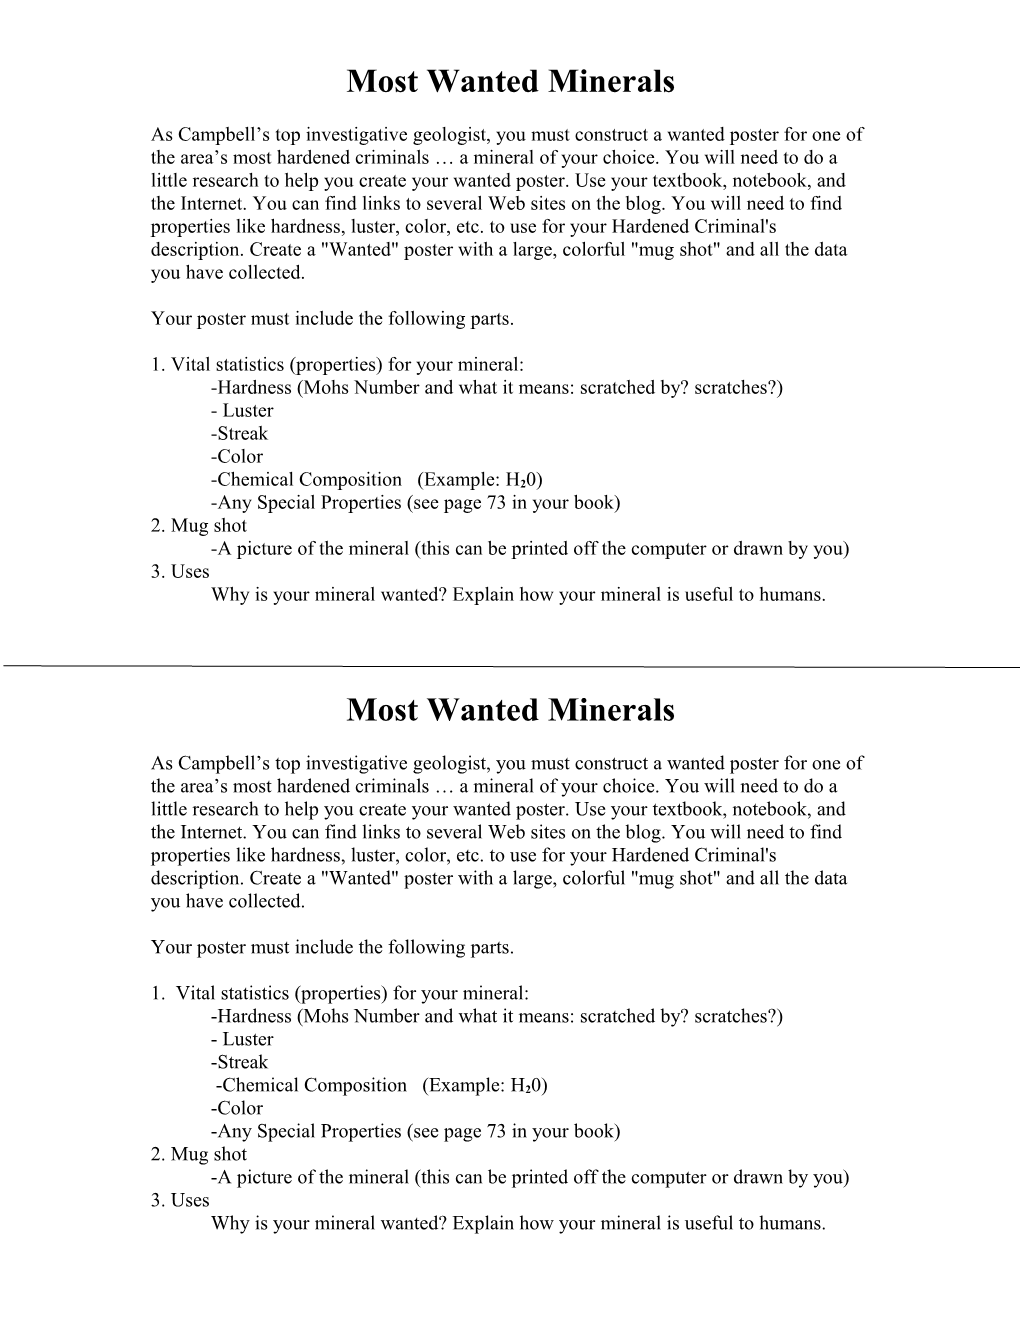 Most Wanted Minerals